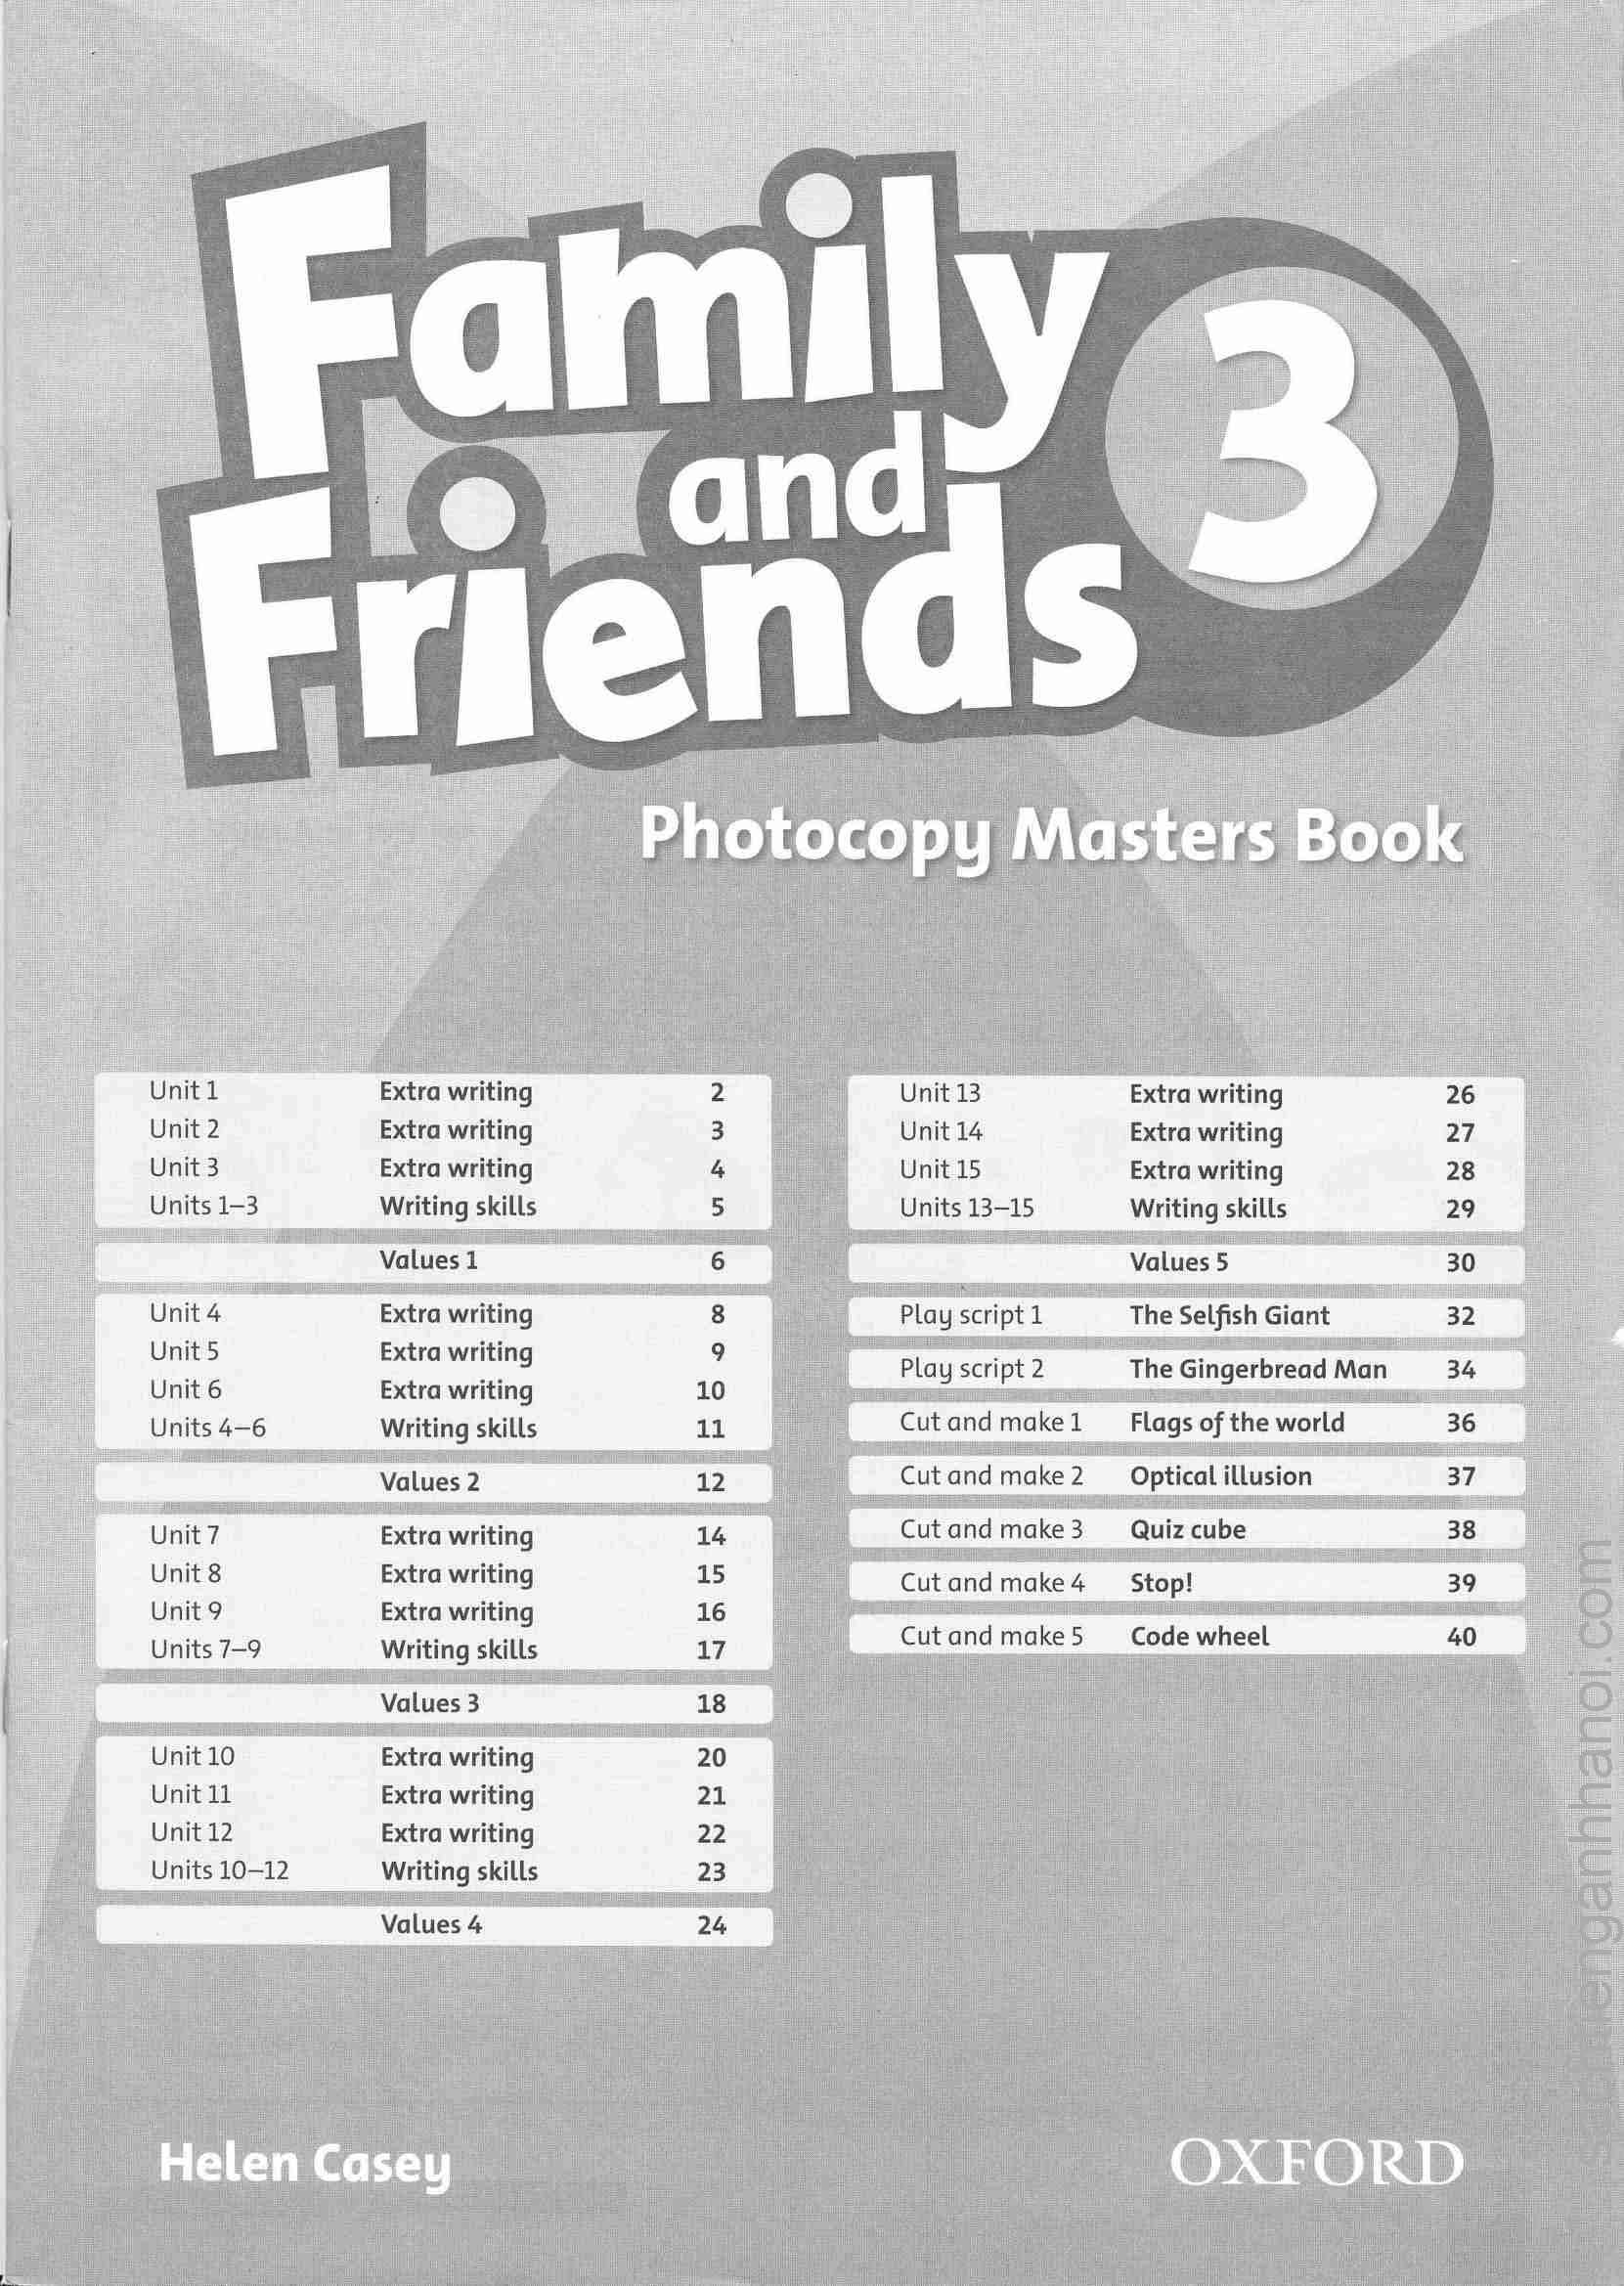 Family 1 unit 11. Family and friends 4. Family and friends 3 Test Unit 4. Family and friends book. Английский Family and friends 3.